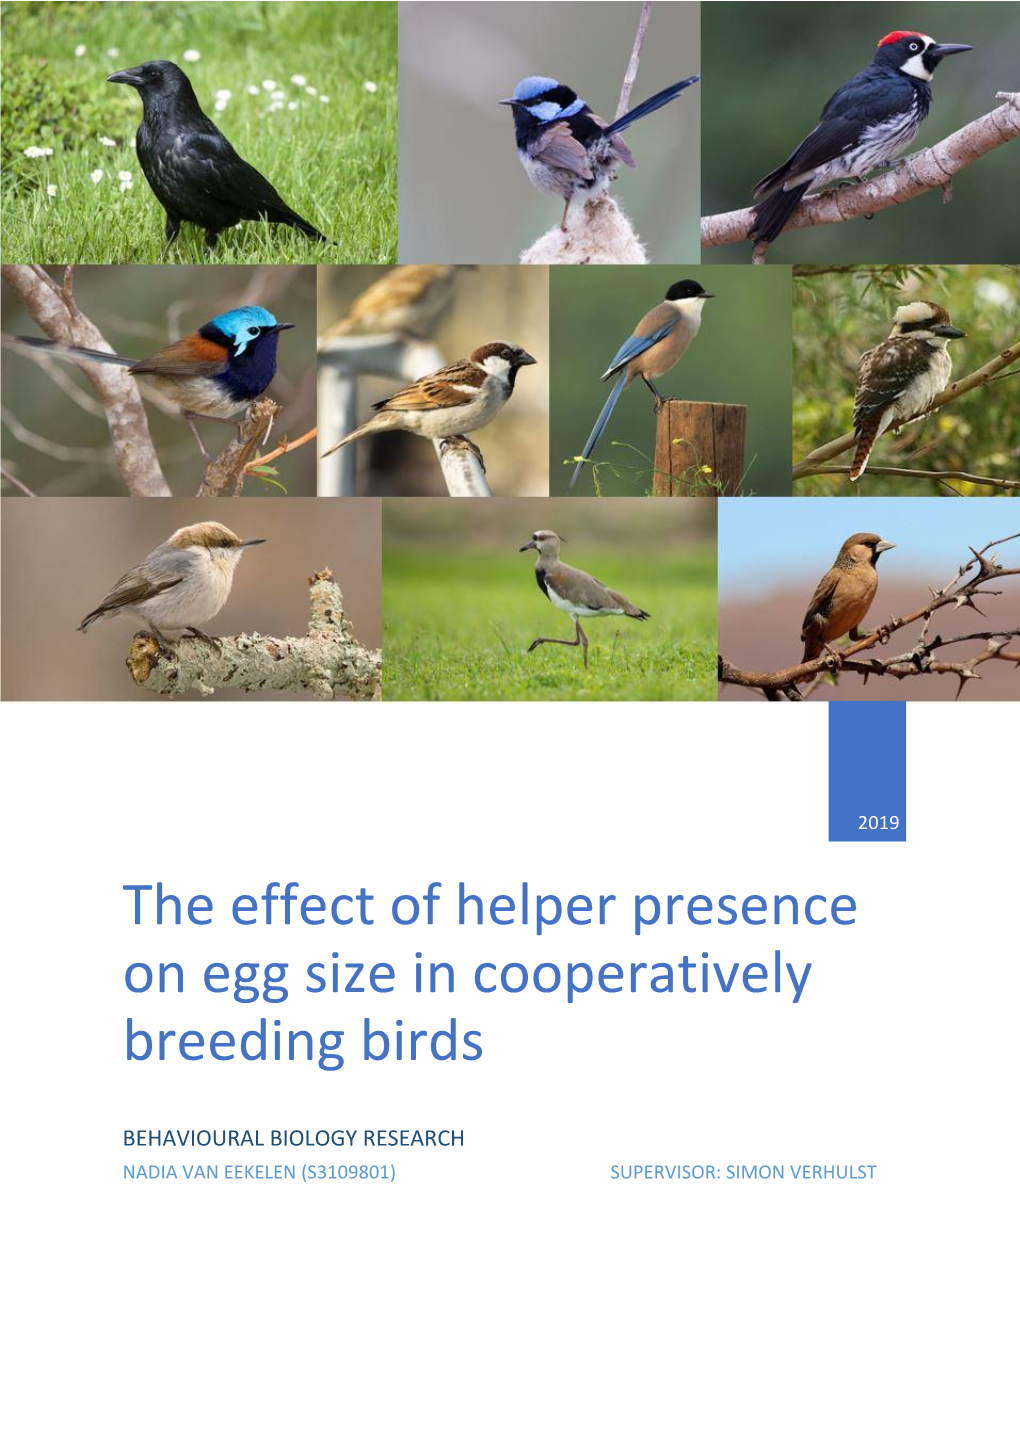 The Effect of Helper Presence on Egg Size in Cooperatively Breeding Birds